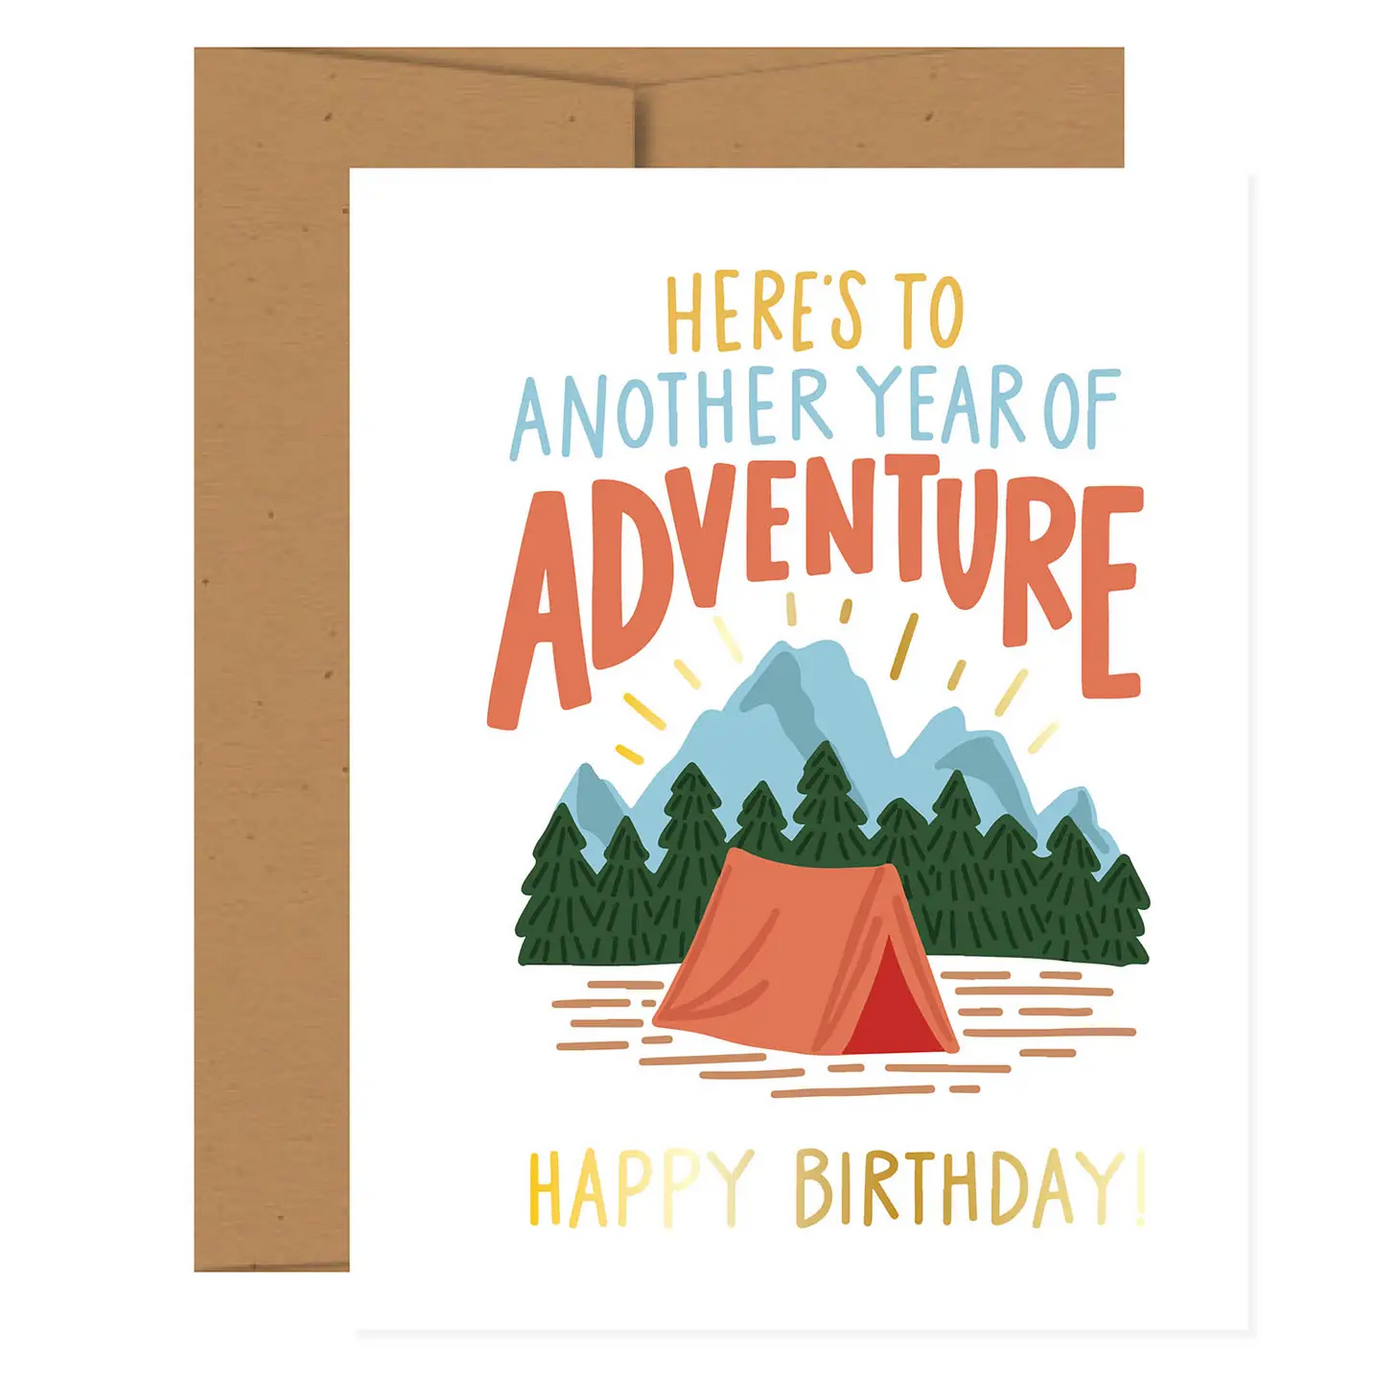 Another Year of Adventure Birthday Greeting Card-Greeting Card-Pippi Post-Stella Violet Boutique in Arvada, Colorado